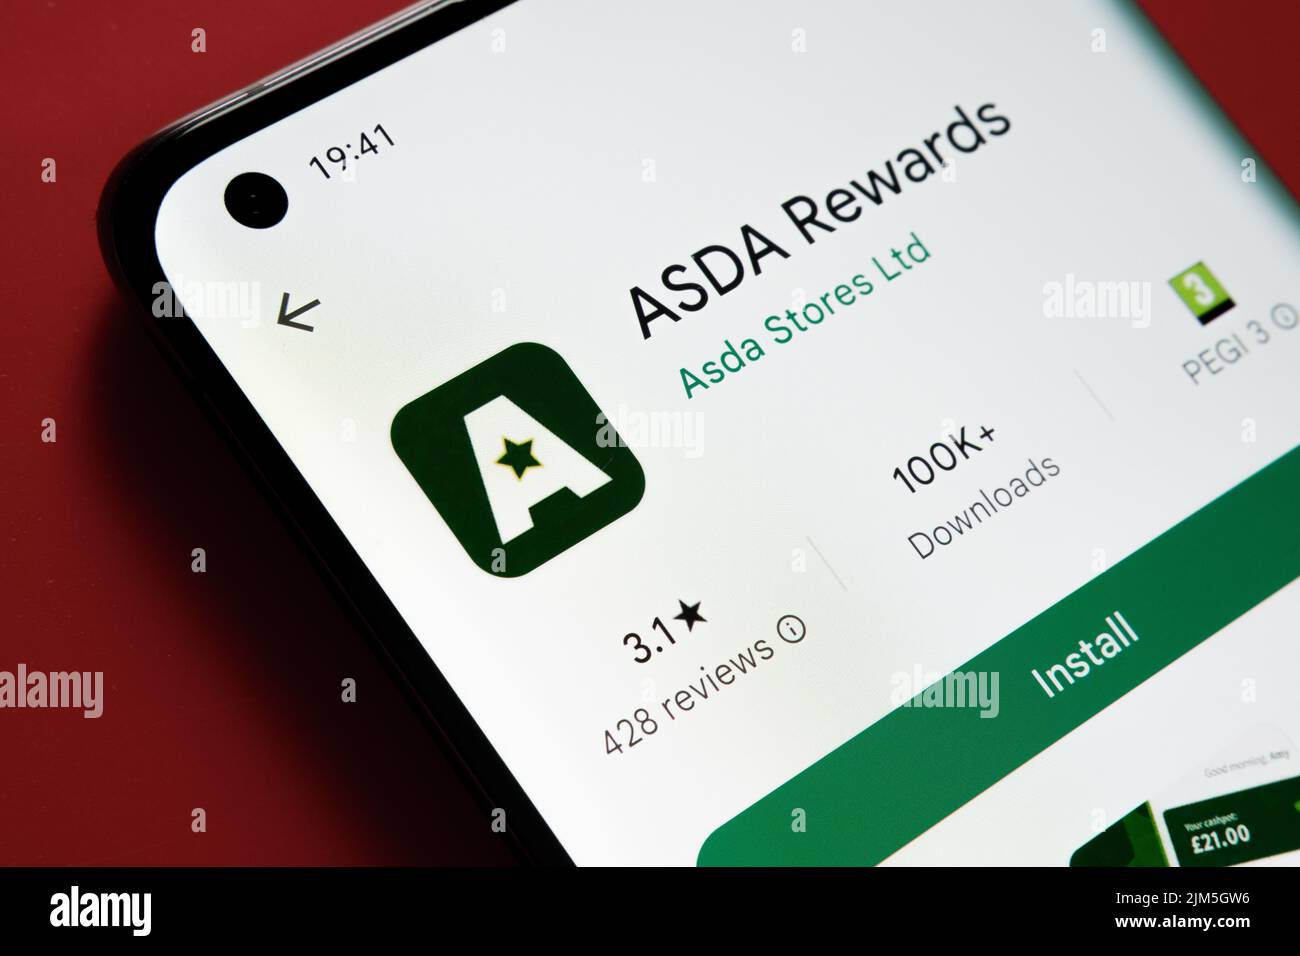 ASDA Rewards app seen in Google Play Store on the smartphone screen placed on red background. Close up photo with selective focus. Stafford, United Ki Stock Photo